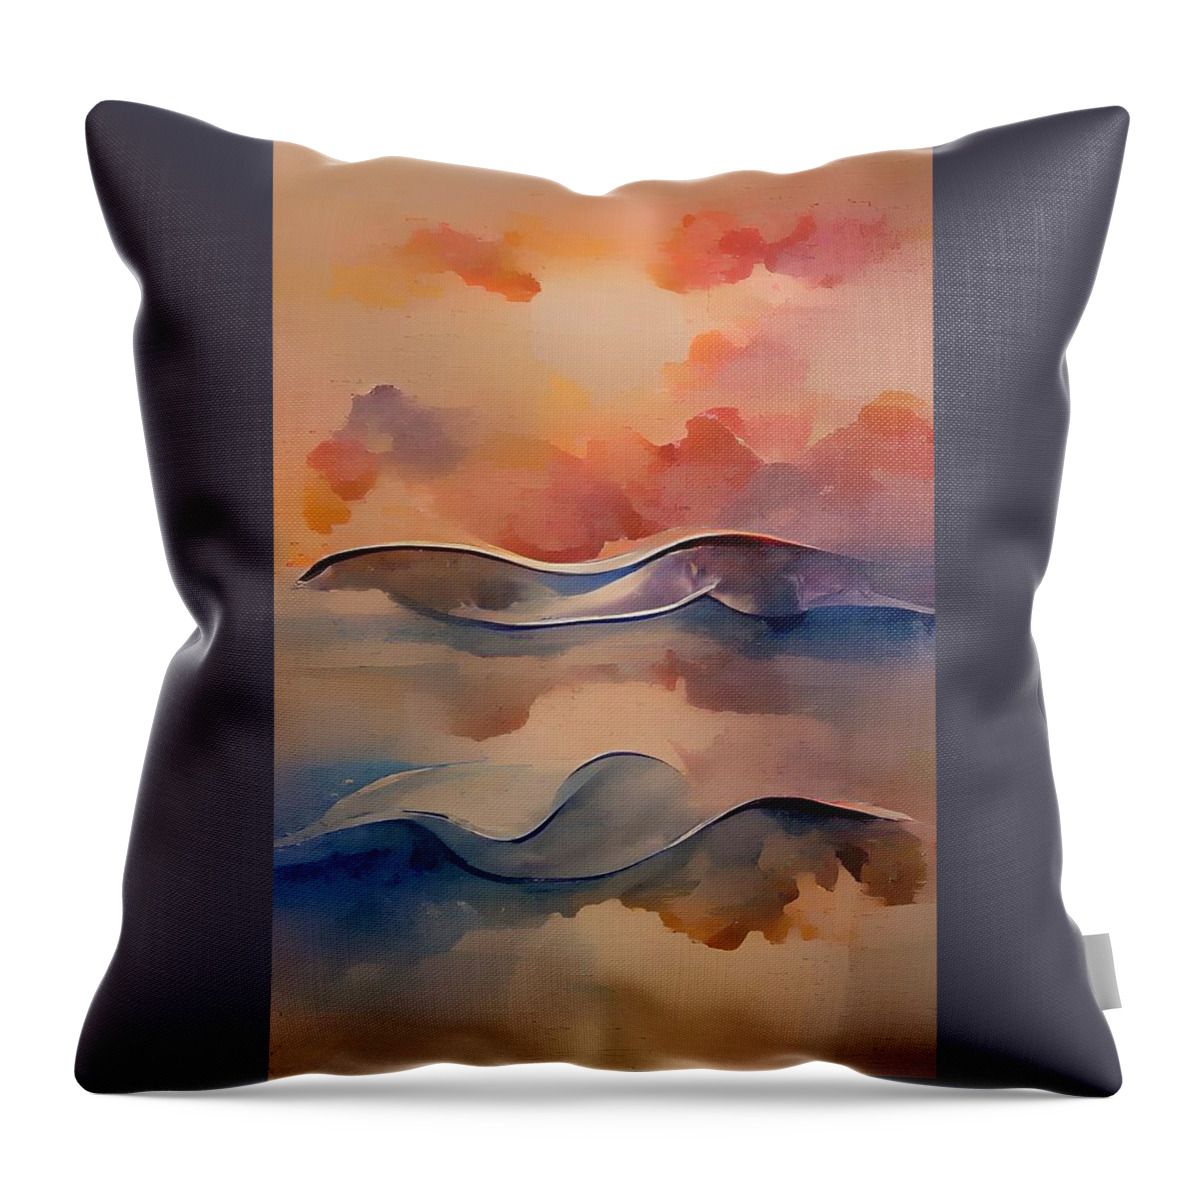  Throw Pillow featuring the digital art Layer Cake by Rod Turner